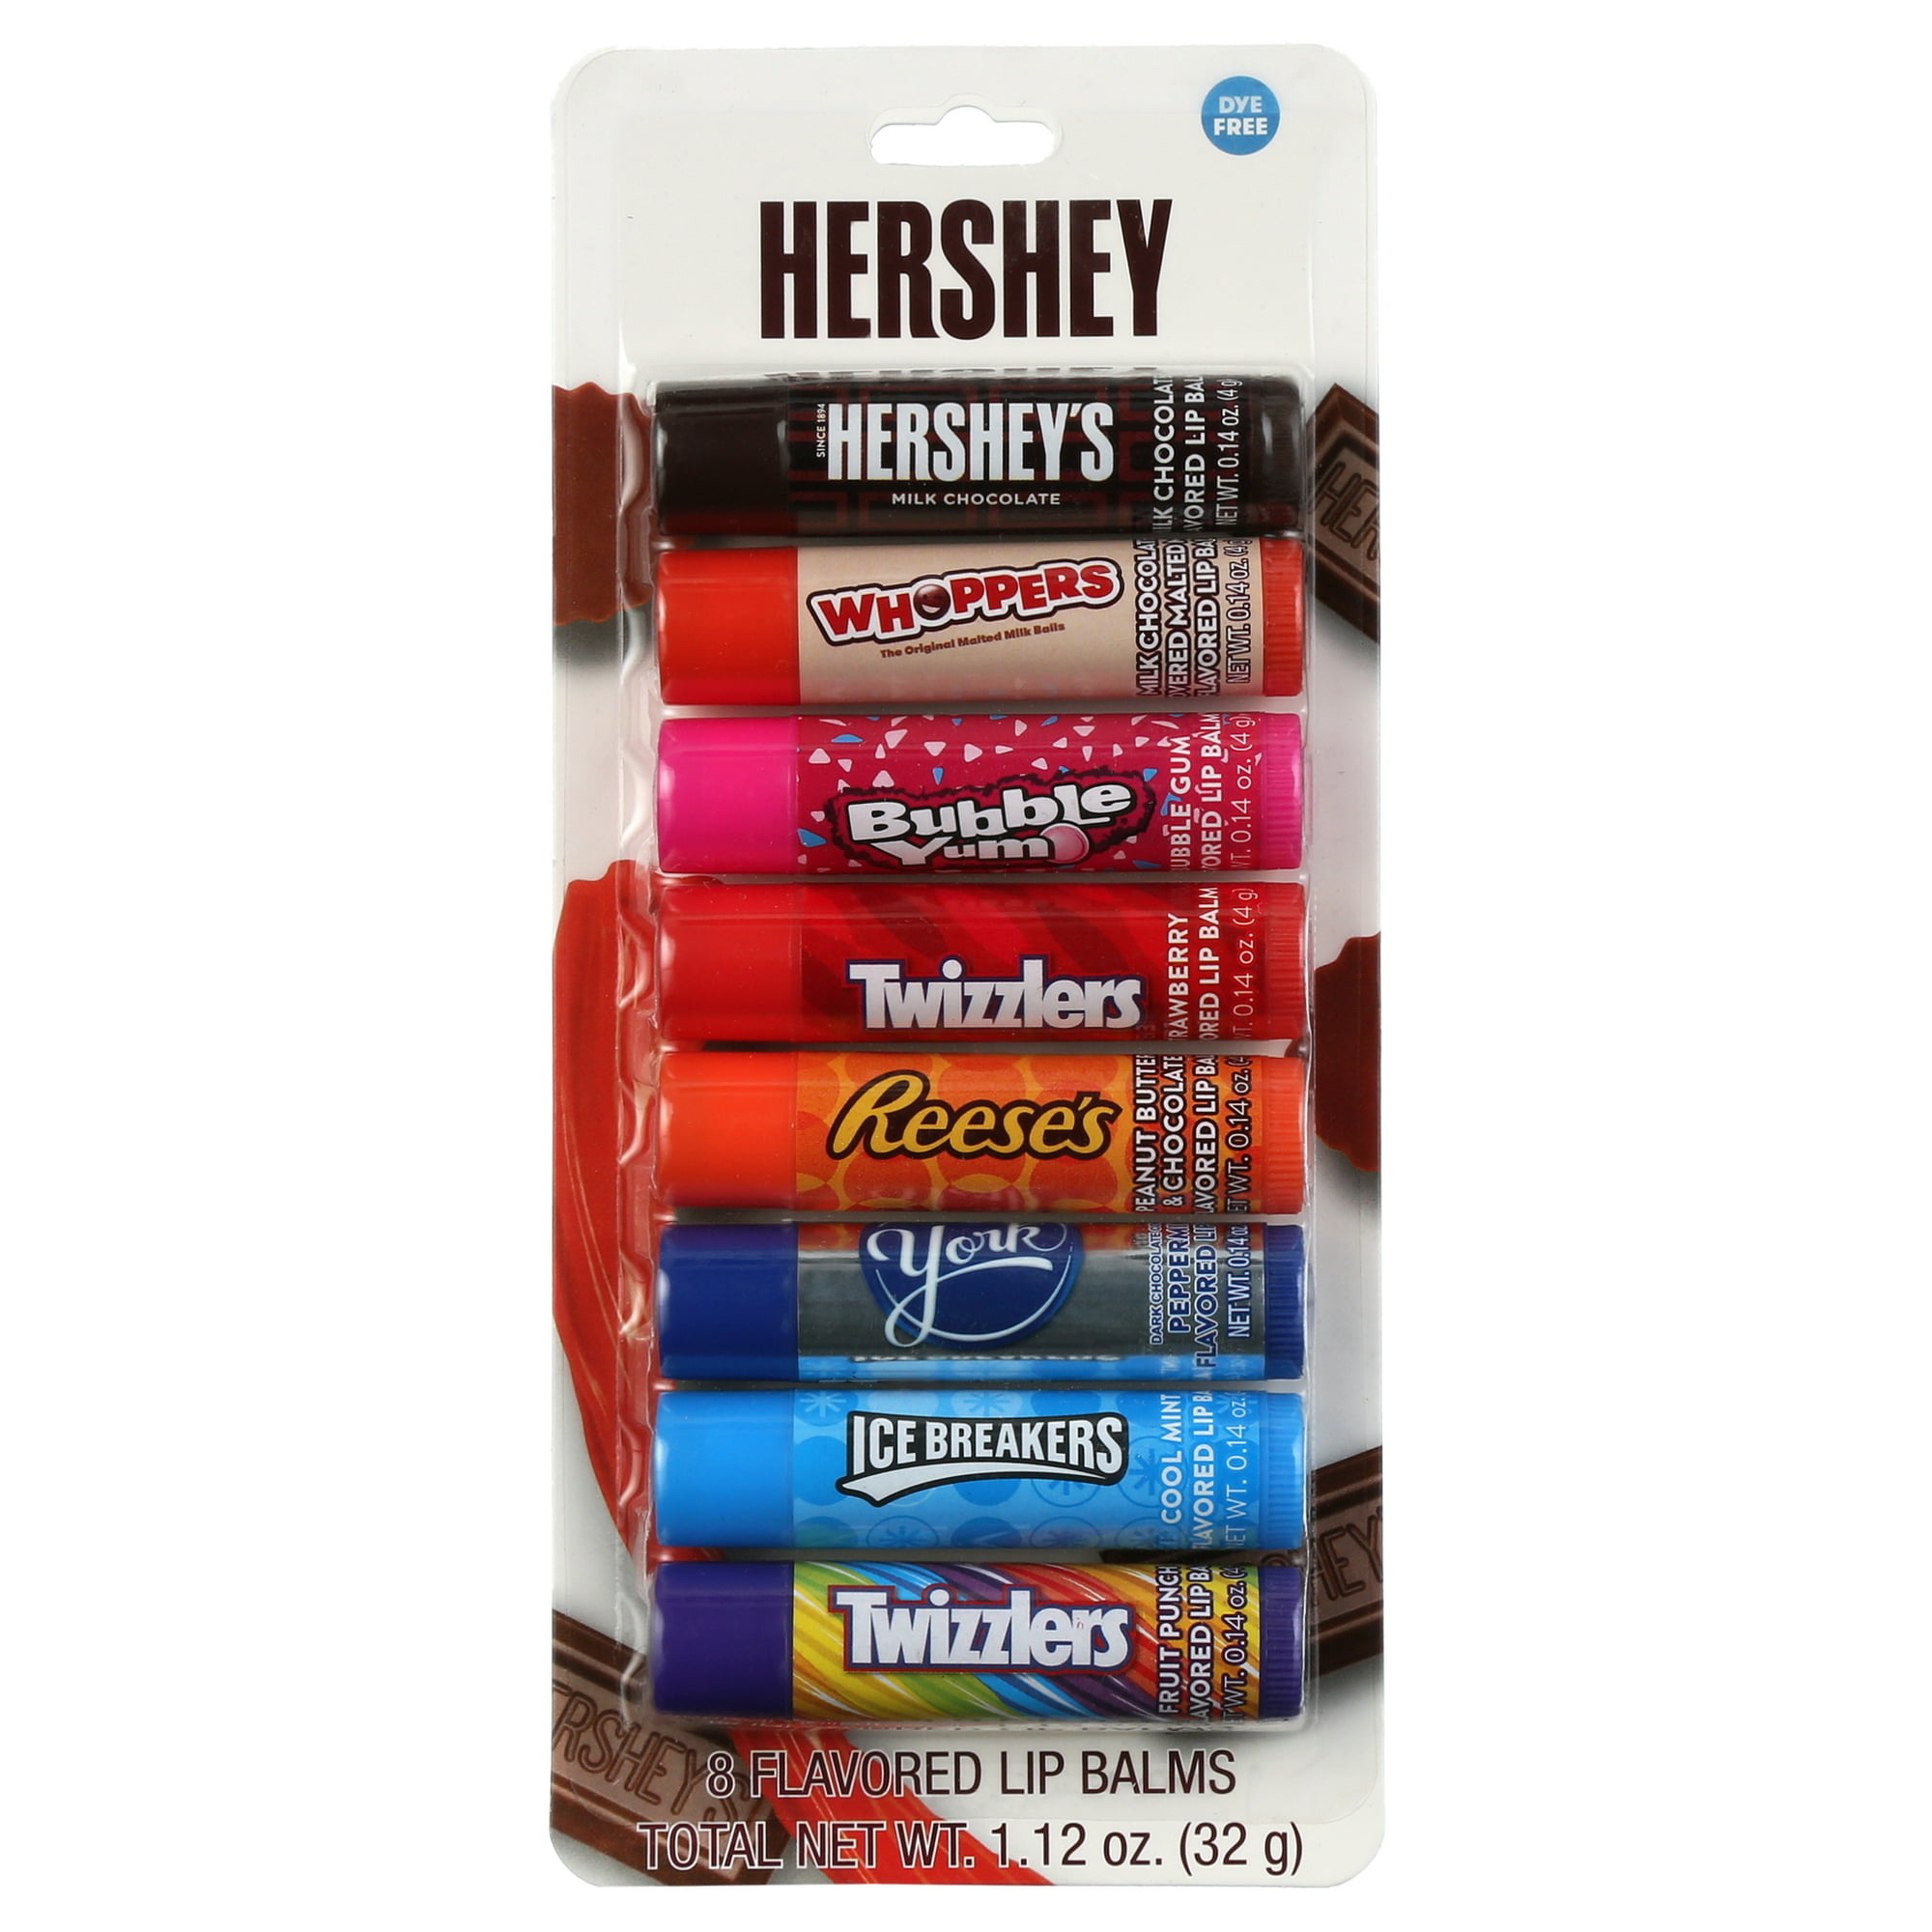 eight chapsticks with similar smells and packaging to candy made by Hershey